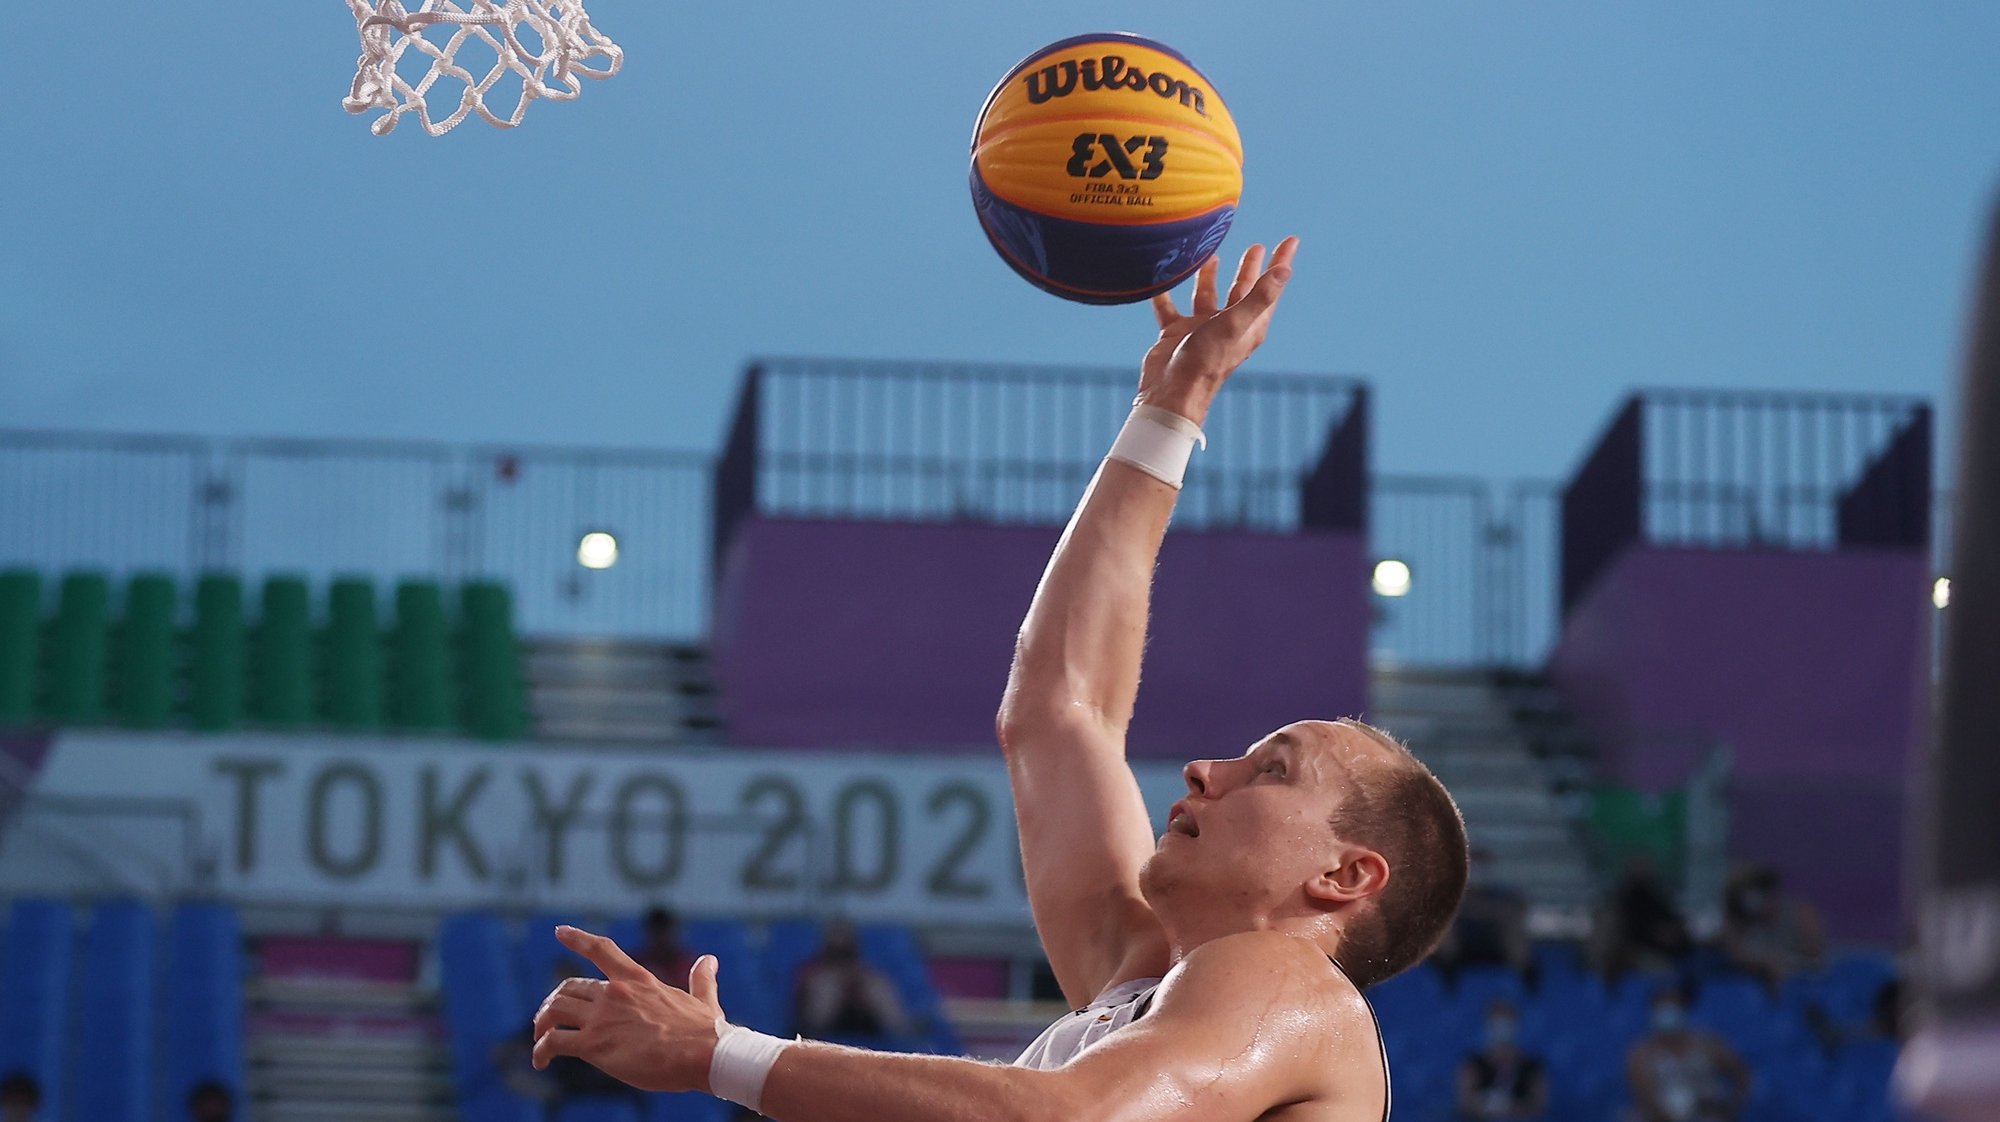 epa09373655 Nick Celis of Belgium in action during the Men&#039;s Semifinal match between Belgium and Latvia during the 3x3 Basketball events of the Tokyo 2020 Olympic Games at the Aomi Urban Sports Park in Tokyo, Japan, 28 July 2021.  EPA/FAZRY ISMAIL